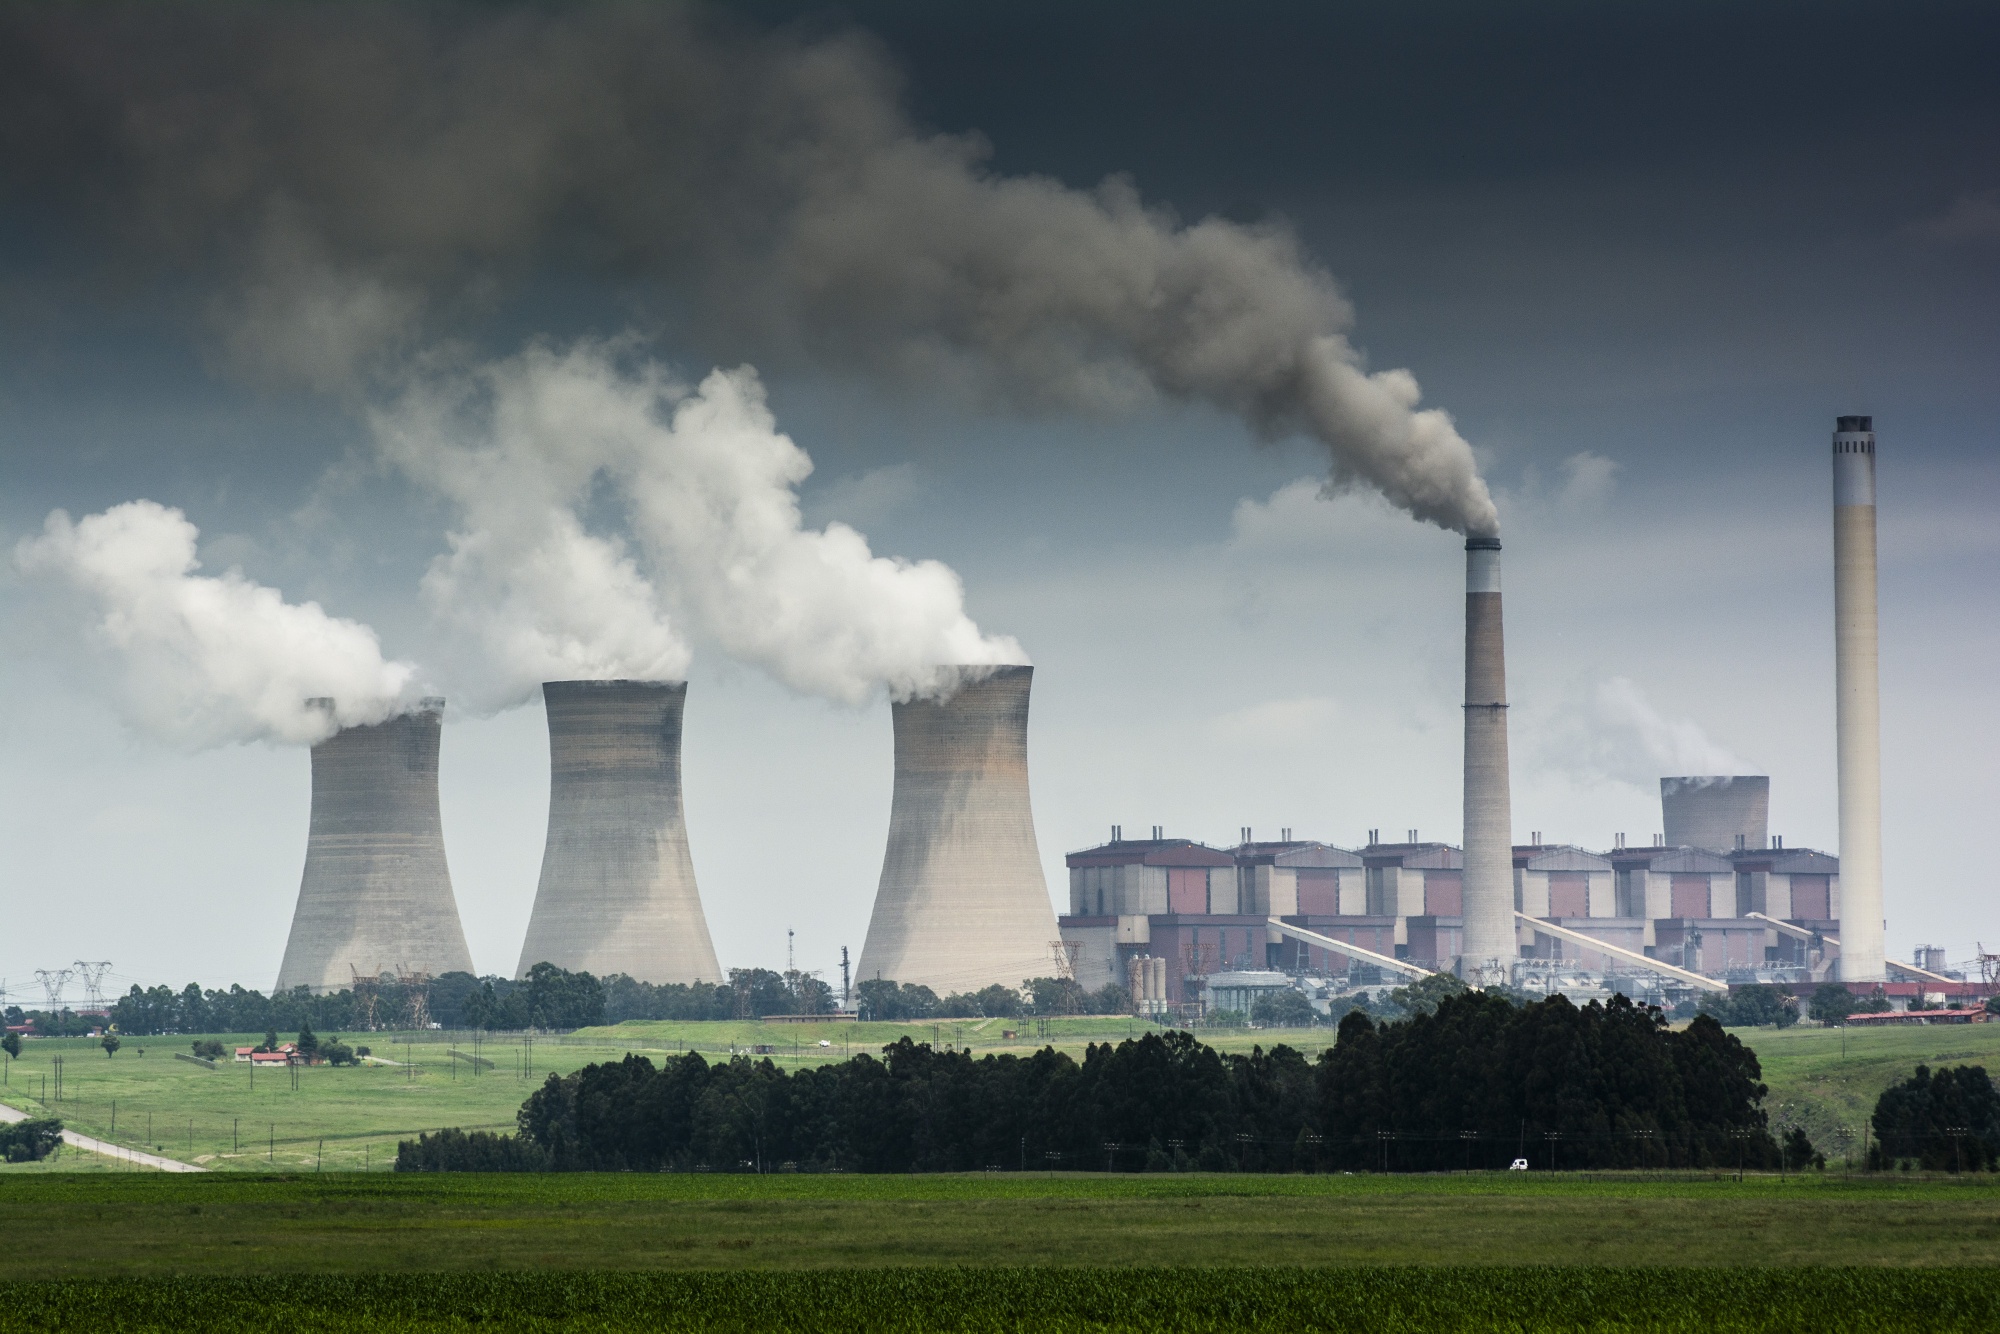 Eskom’s&nbsp;coal-fired power station in Mpumalanga, South Africa.